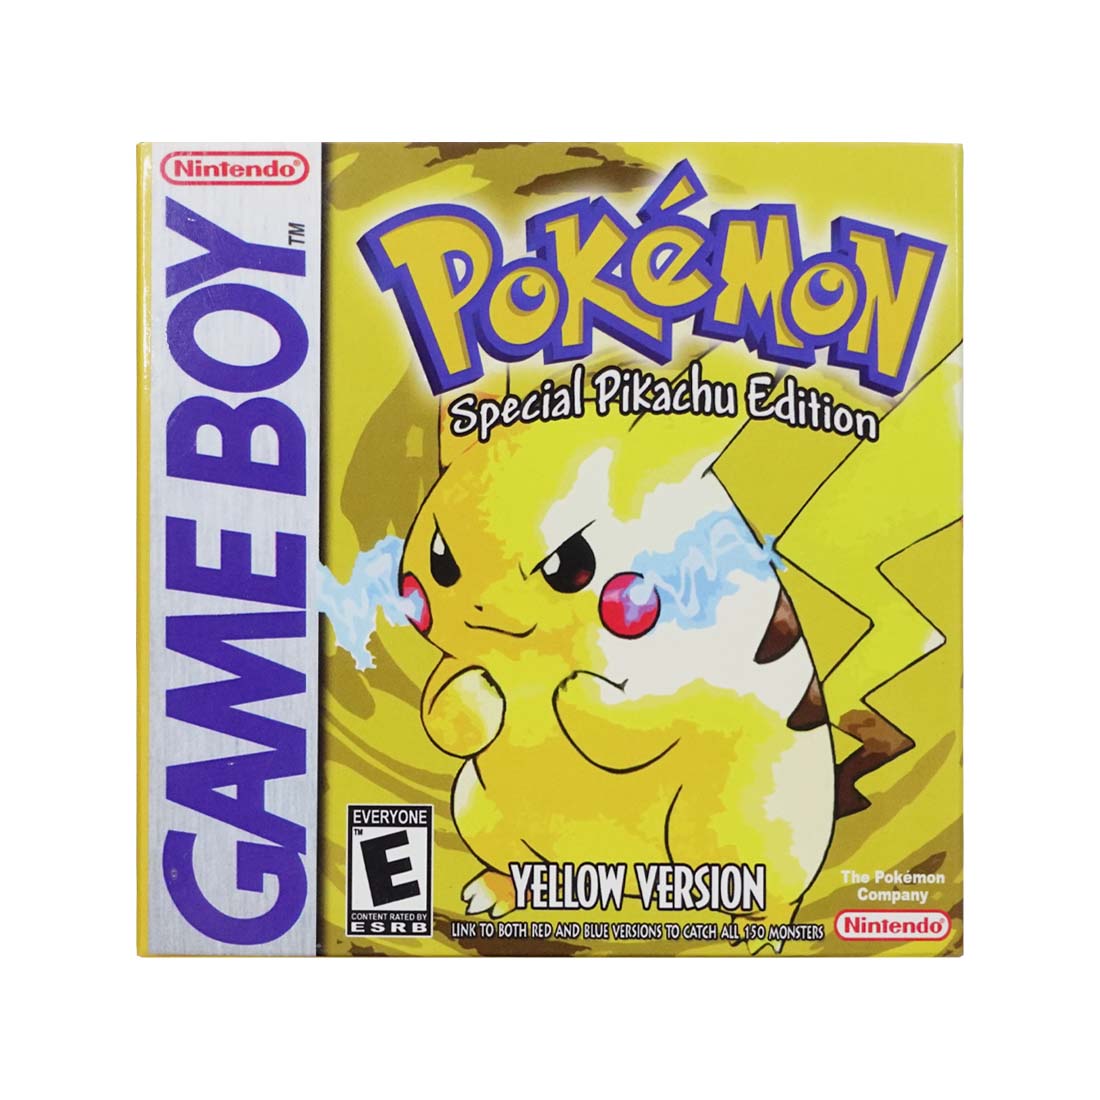 (Pre-Owned) Pokemon Special Pikachu Edition: Yellow Version - Gameboy Classic - لعبة